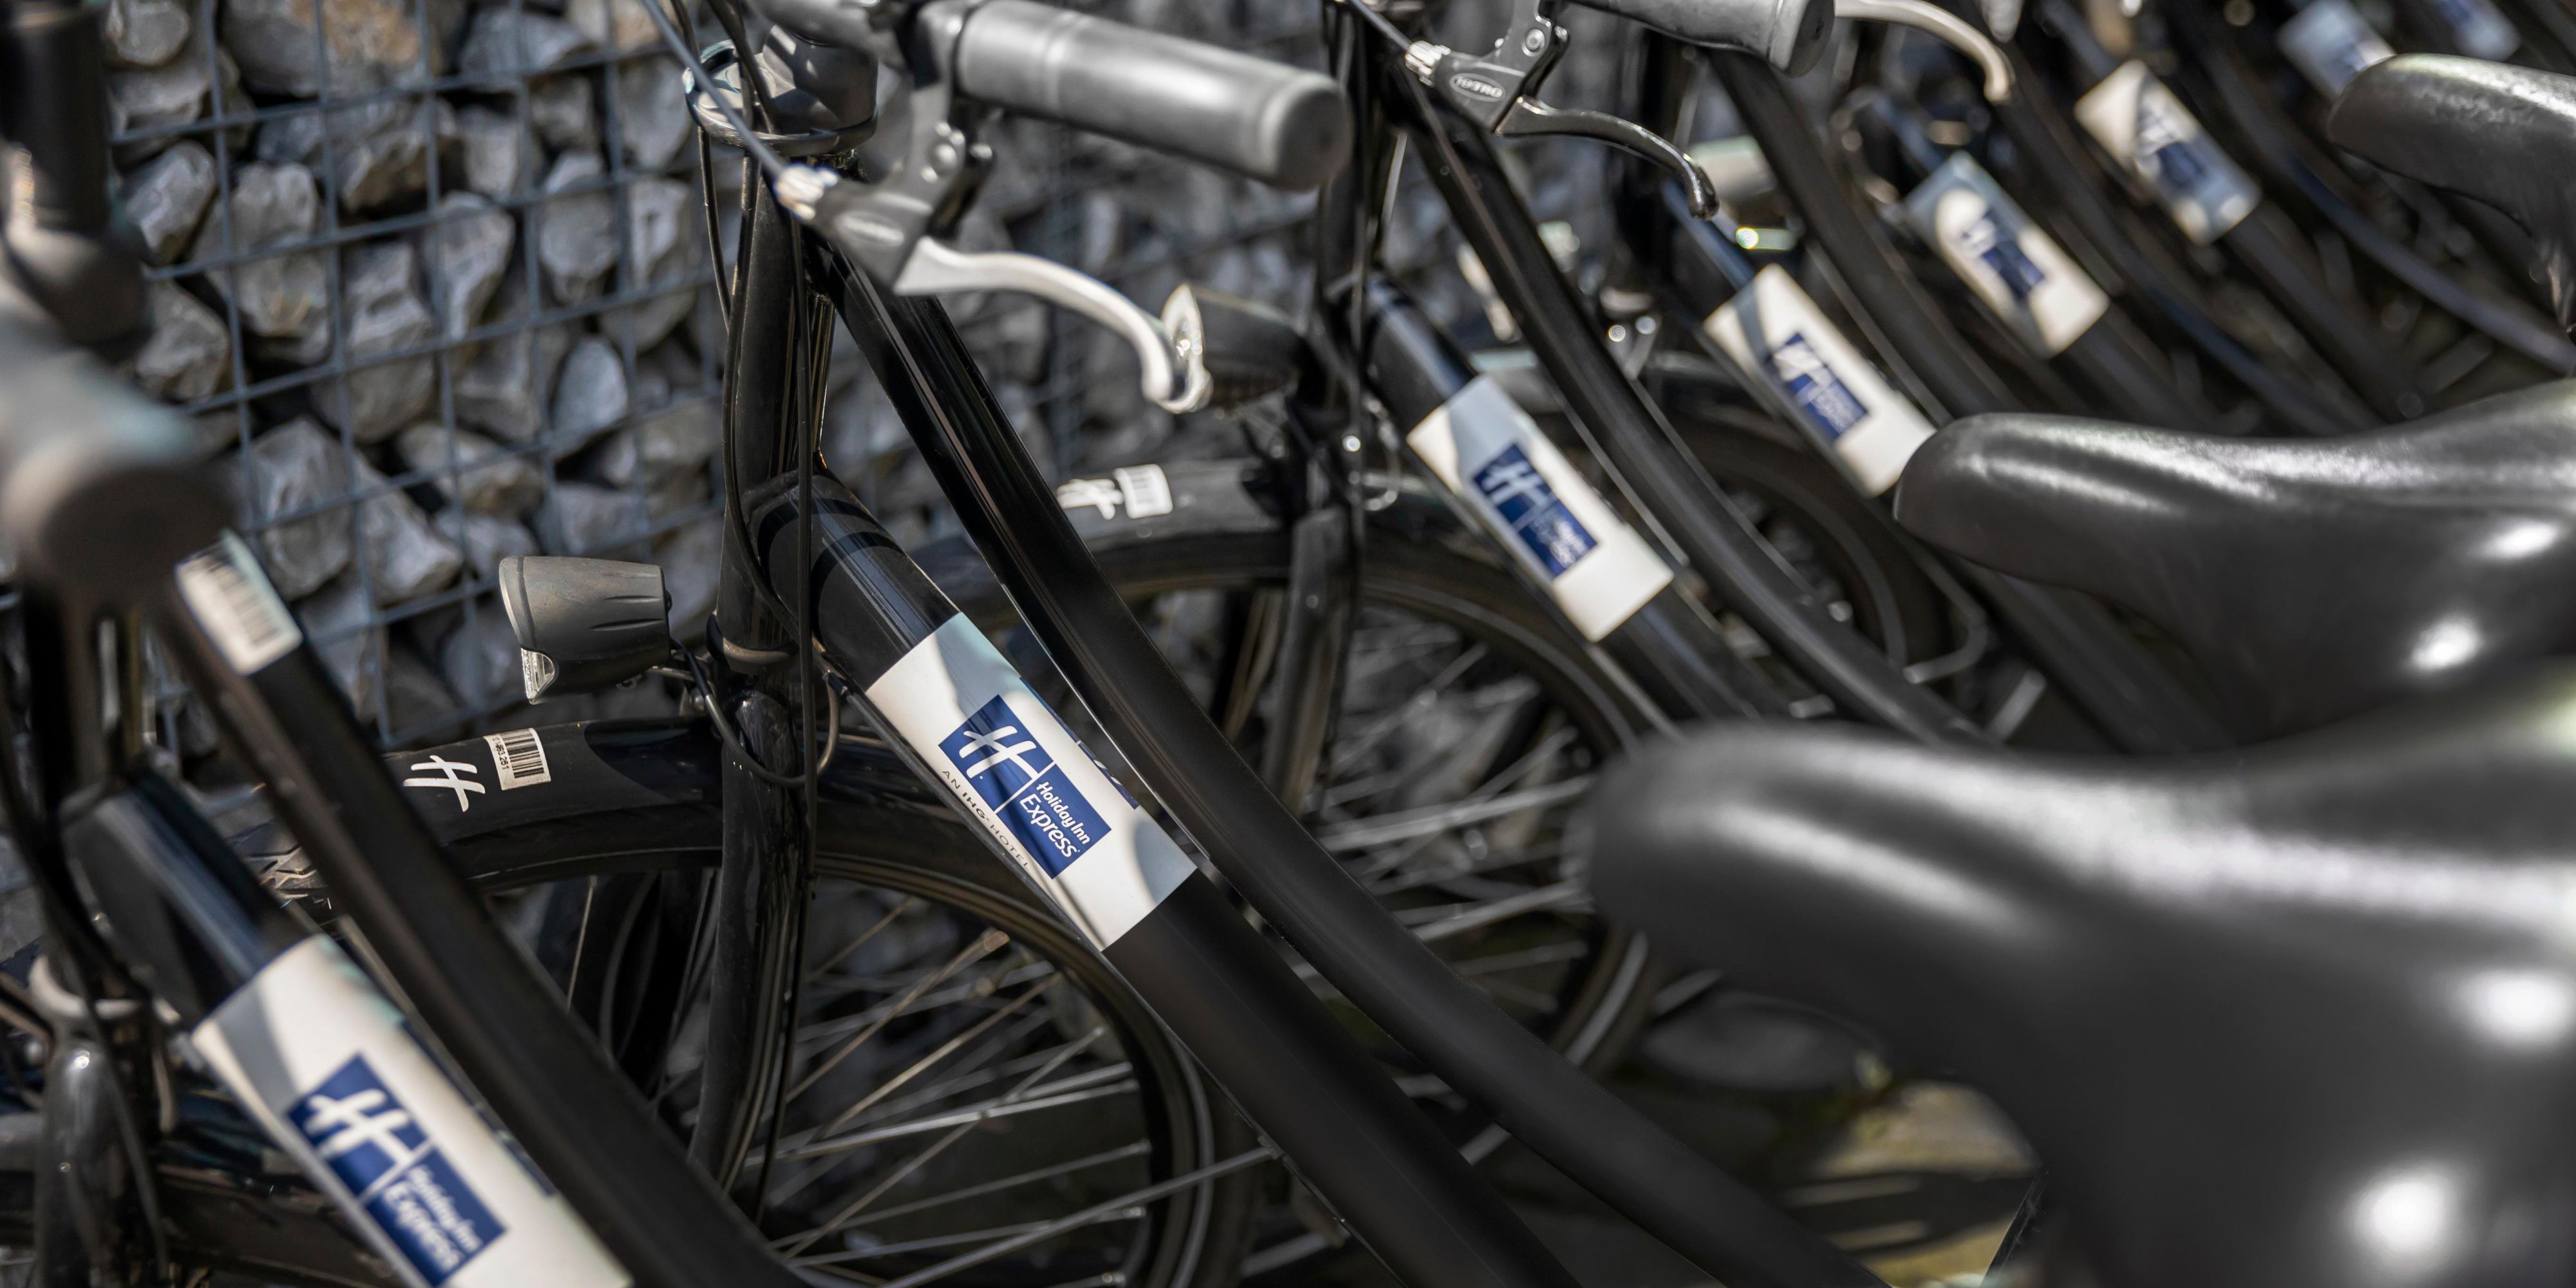 Explore the city of The Hague like a local in an eco-friendly, active way. Our bikes are available at our reception. To guarantee availability, please reserve in advance.